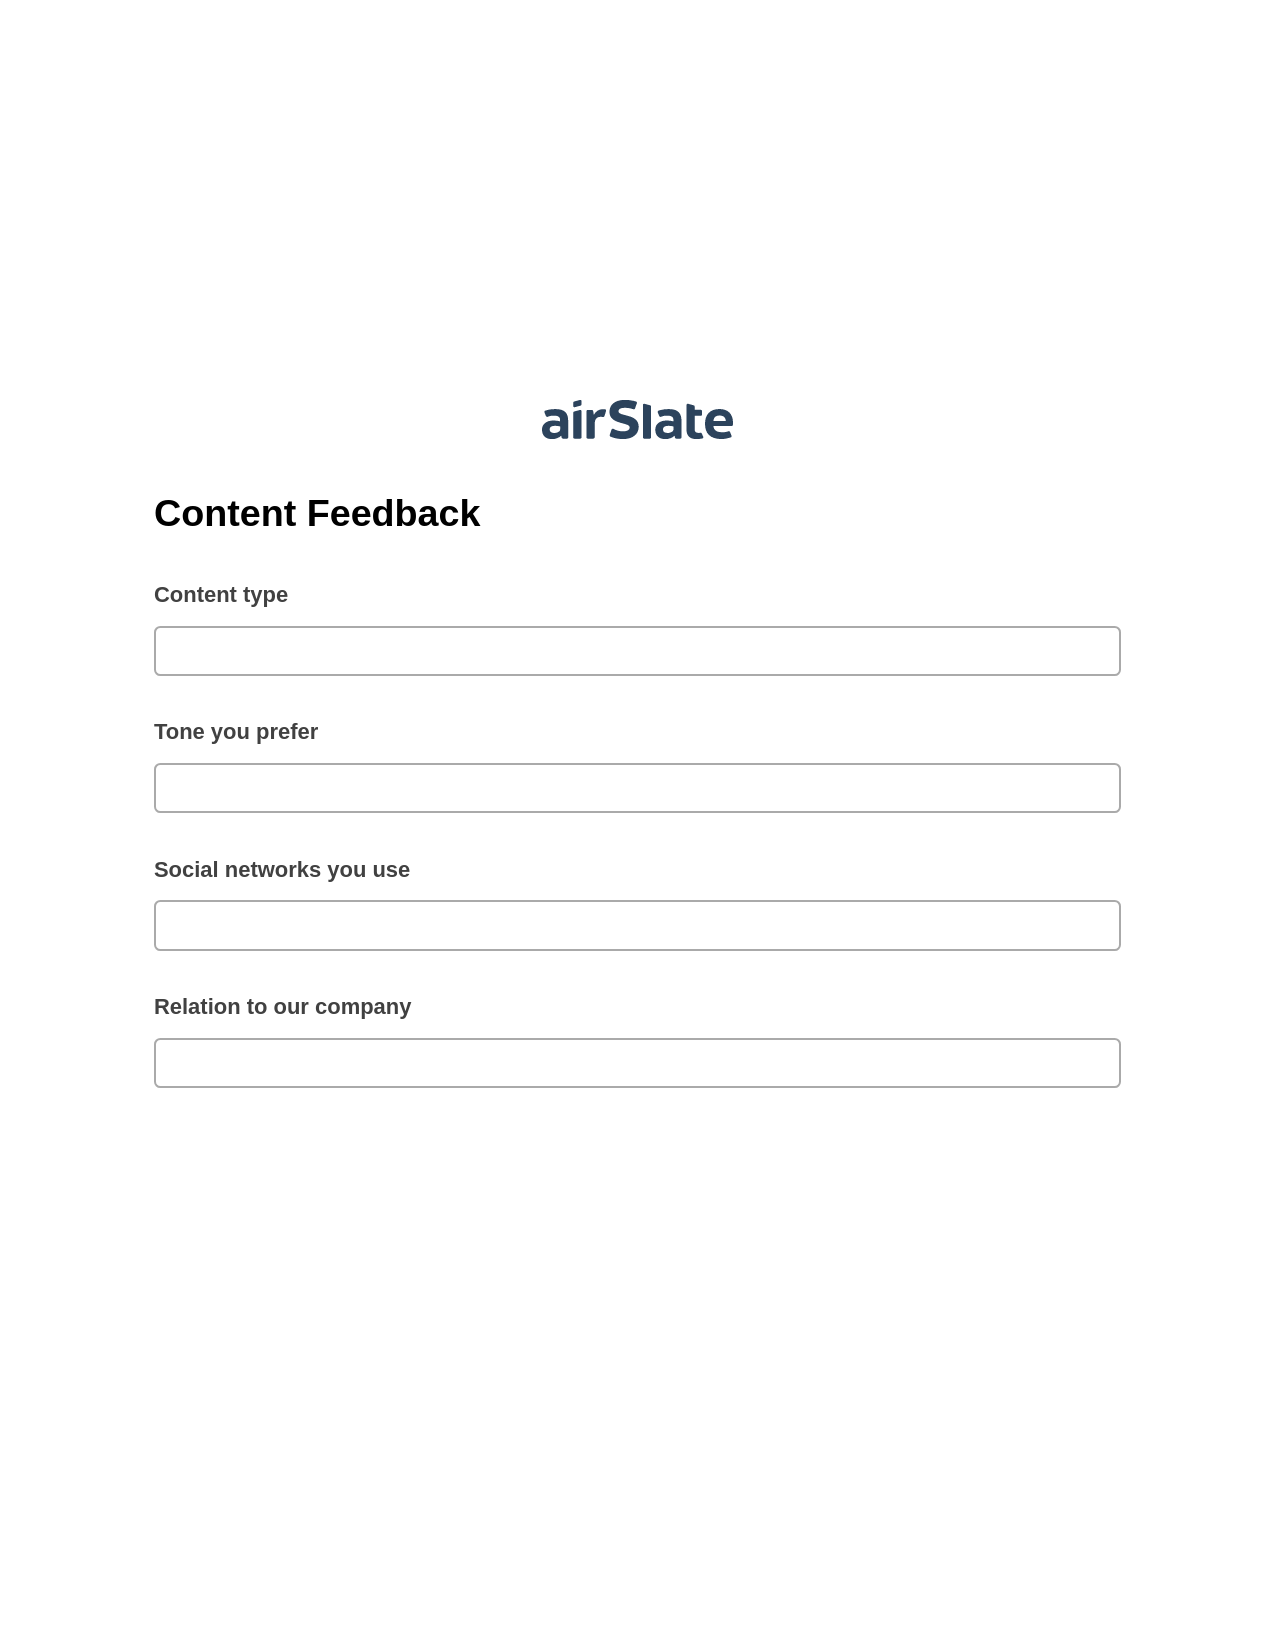 Content Feedback Pre-fill from CSV File Bot, Unassign Role Bot, Slack Notification Postfinish Bot